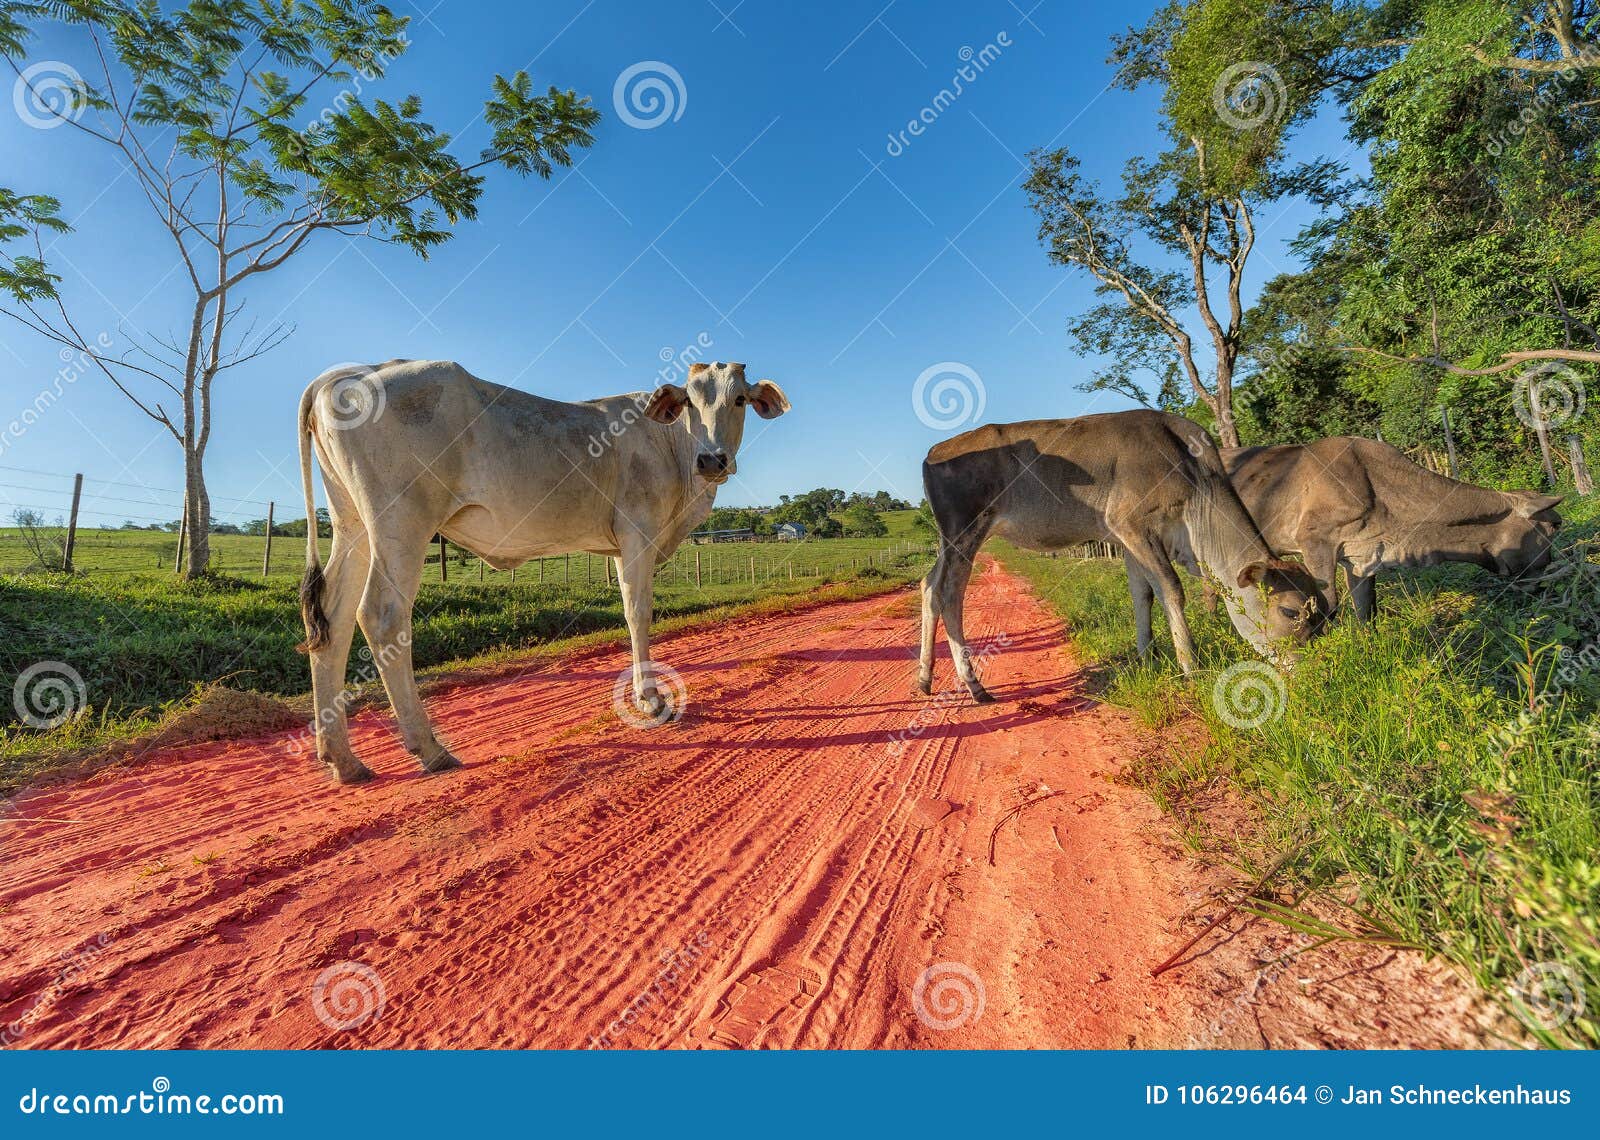 free-roaming cows in paraguay